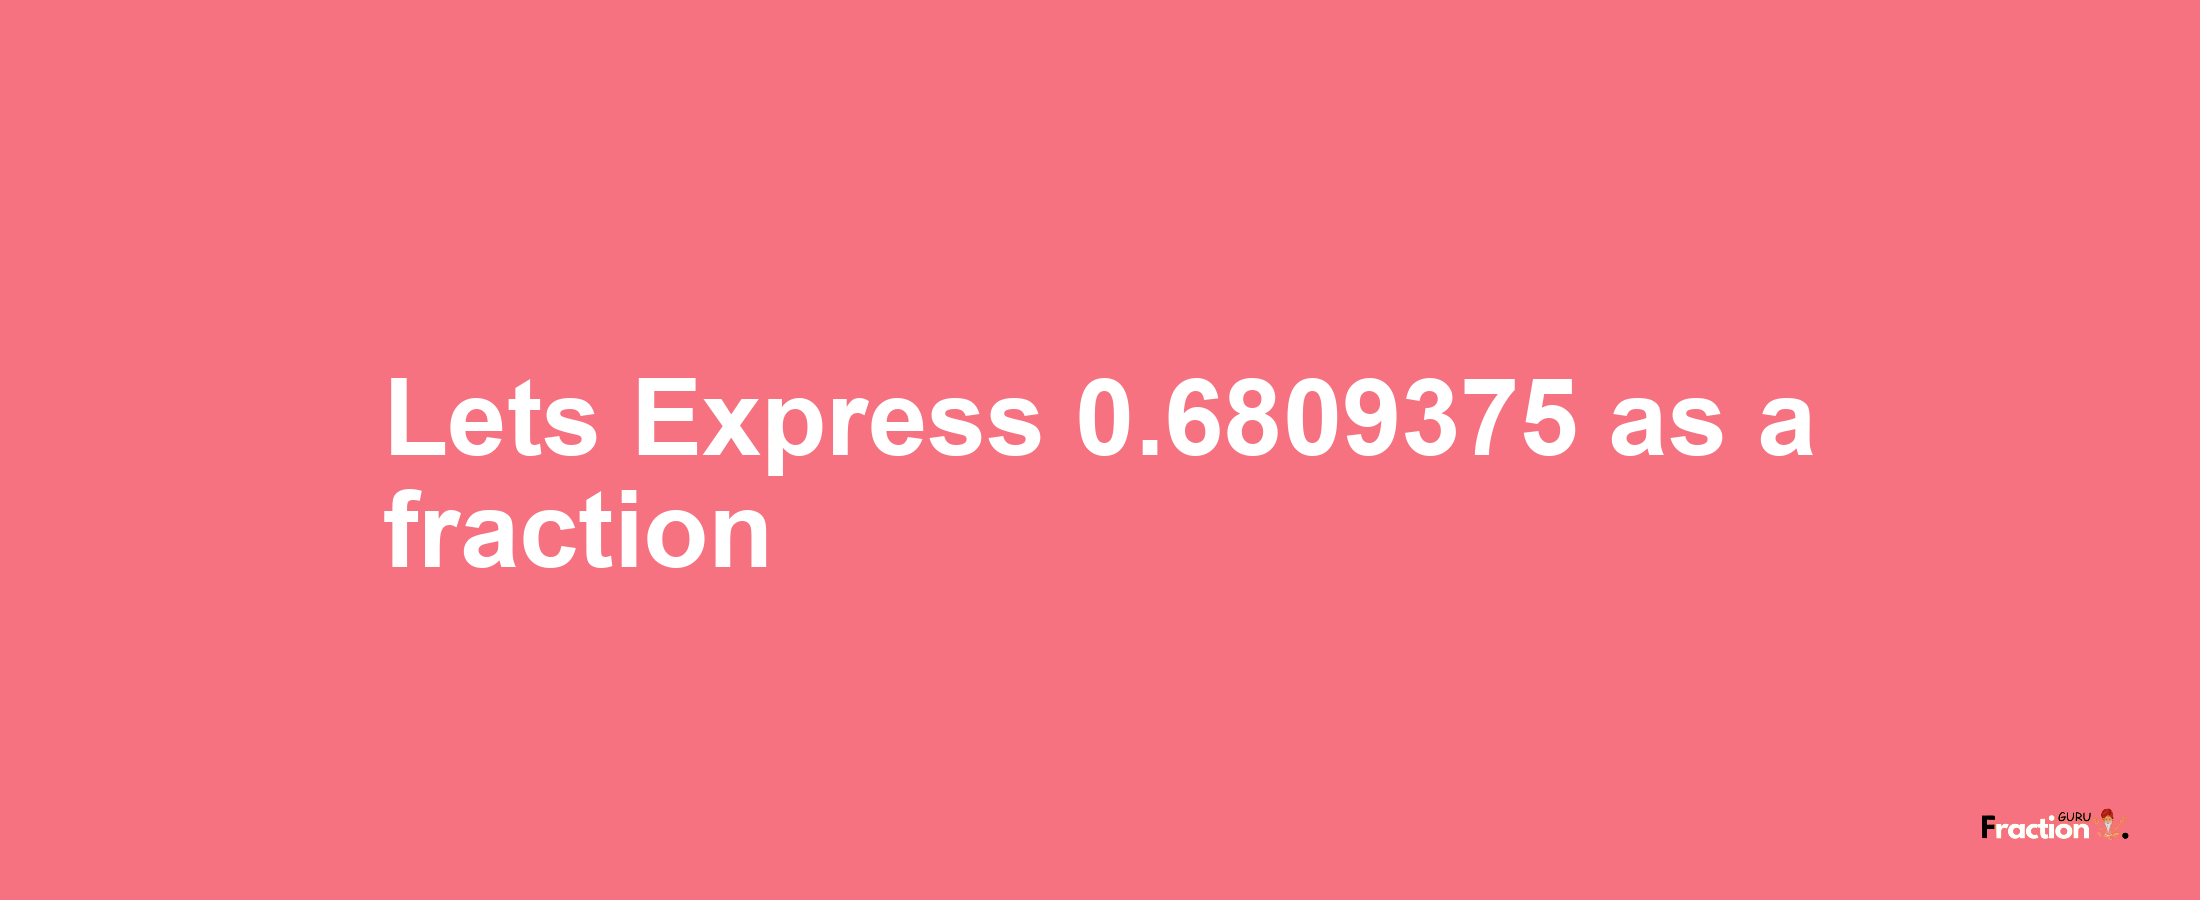 Lets Express 0.6809375 as afraction